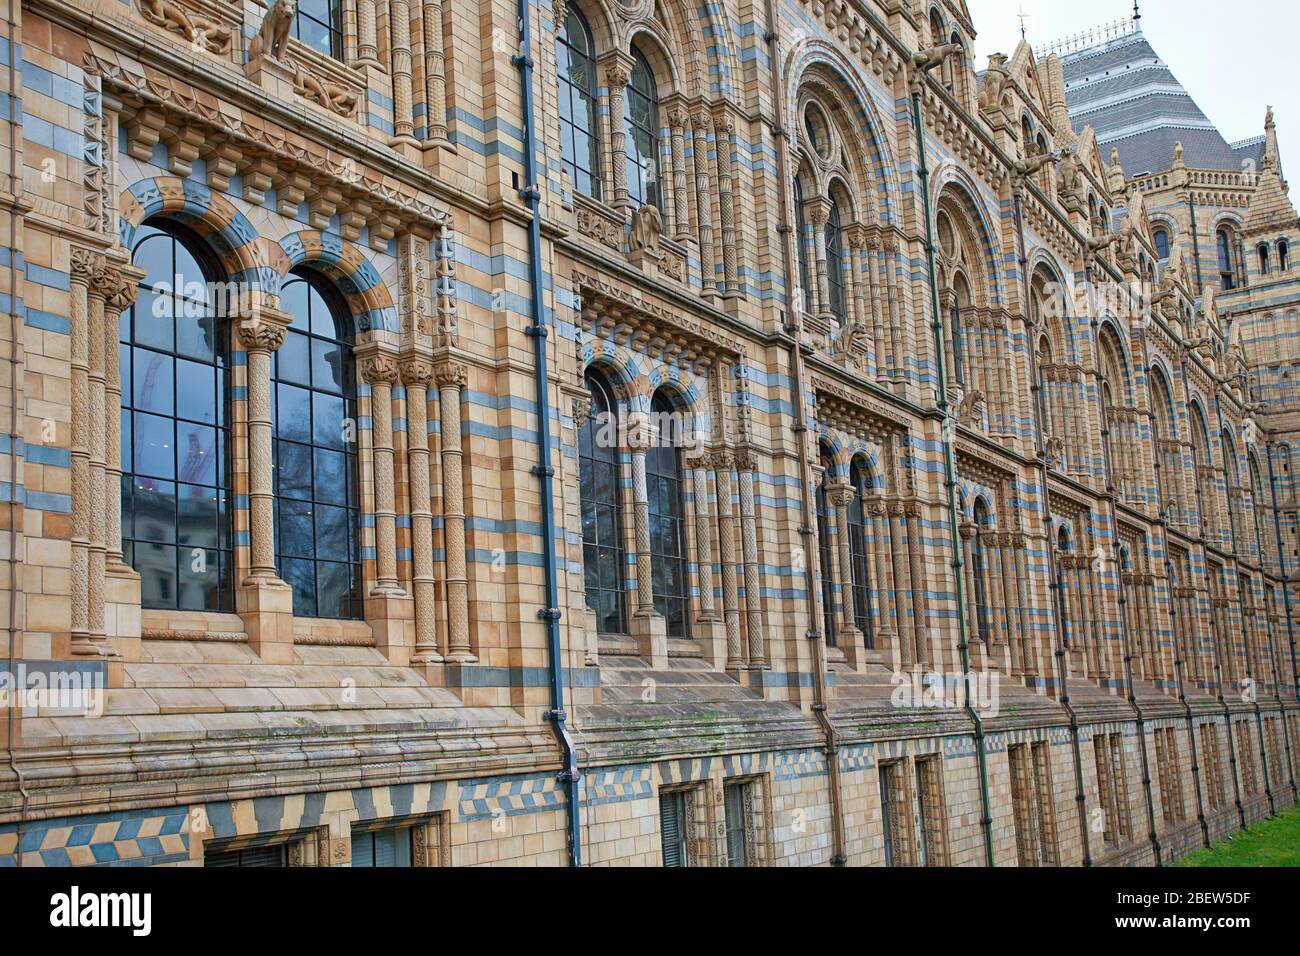 The beautiful exterior of the Natural History Museum, London Stock Photo